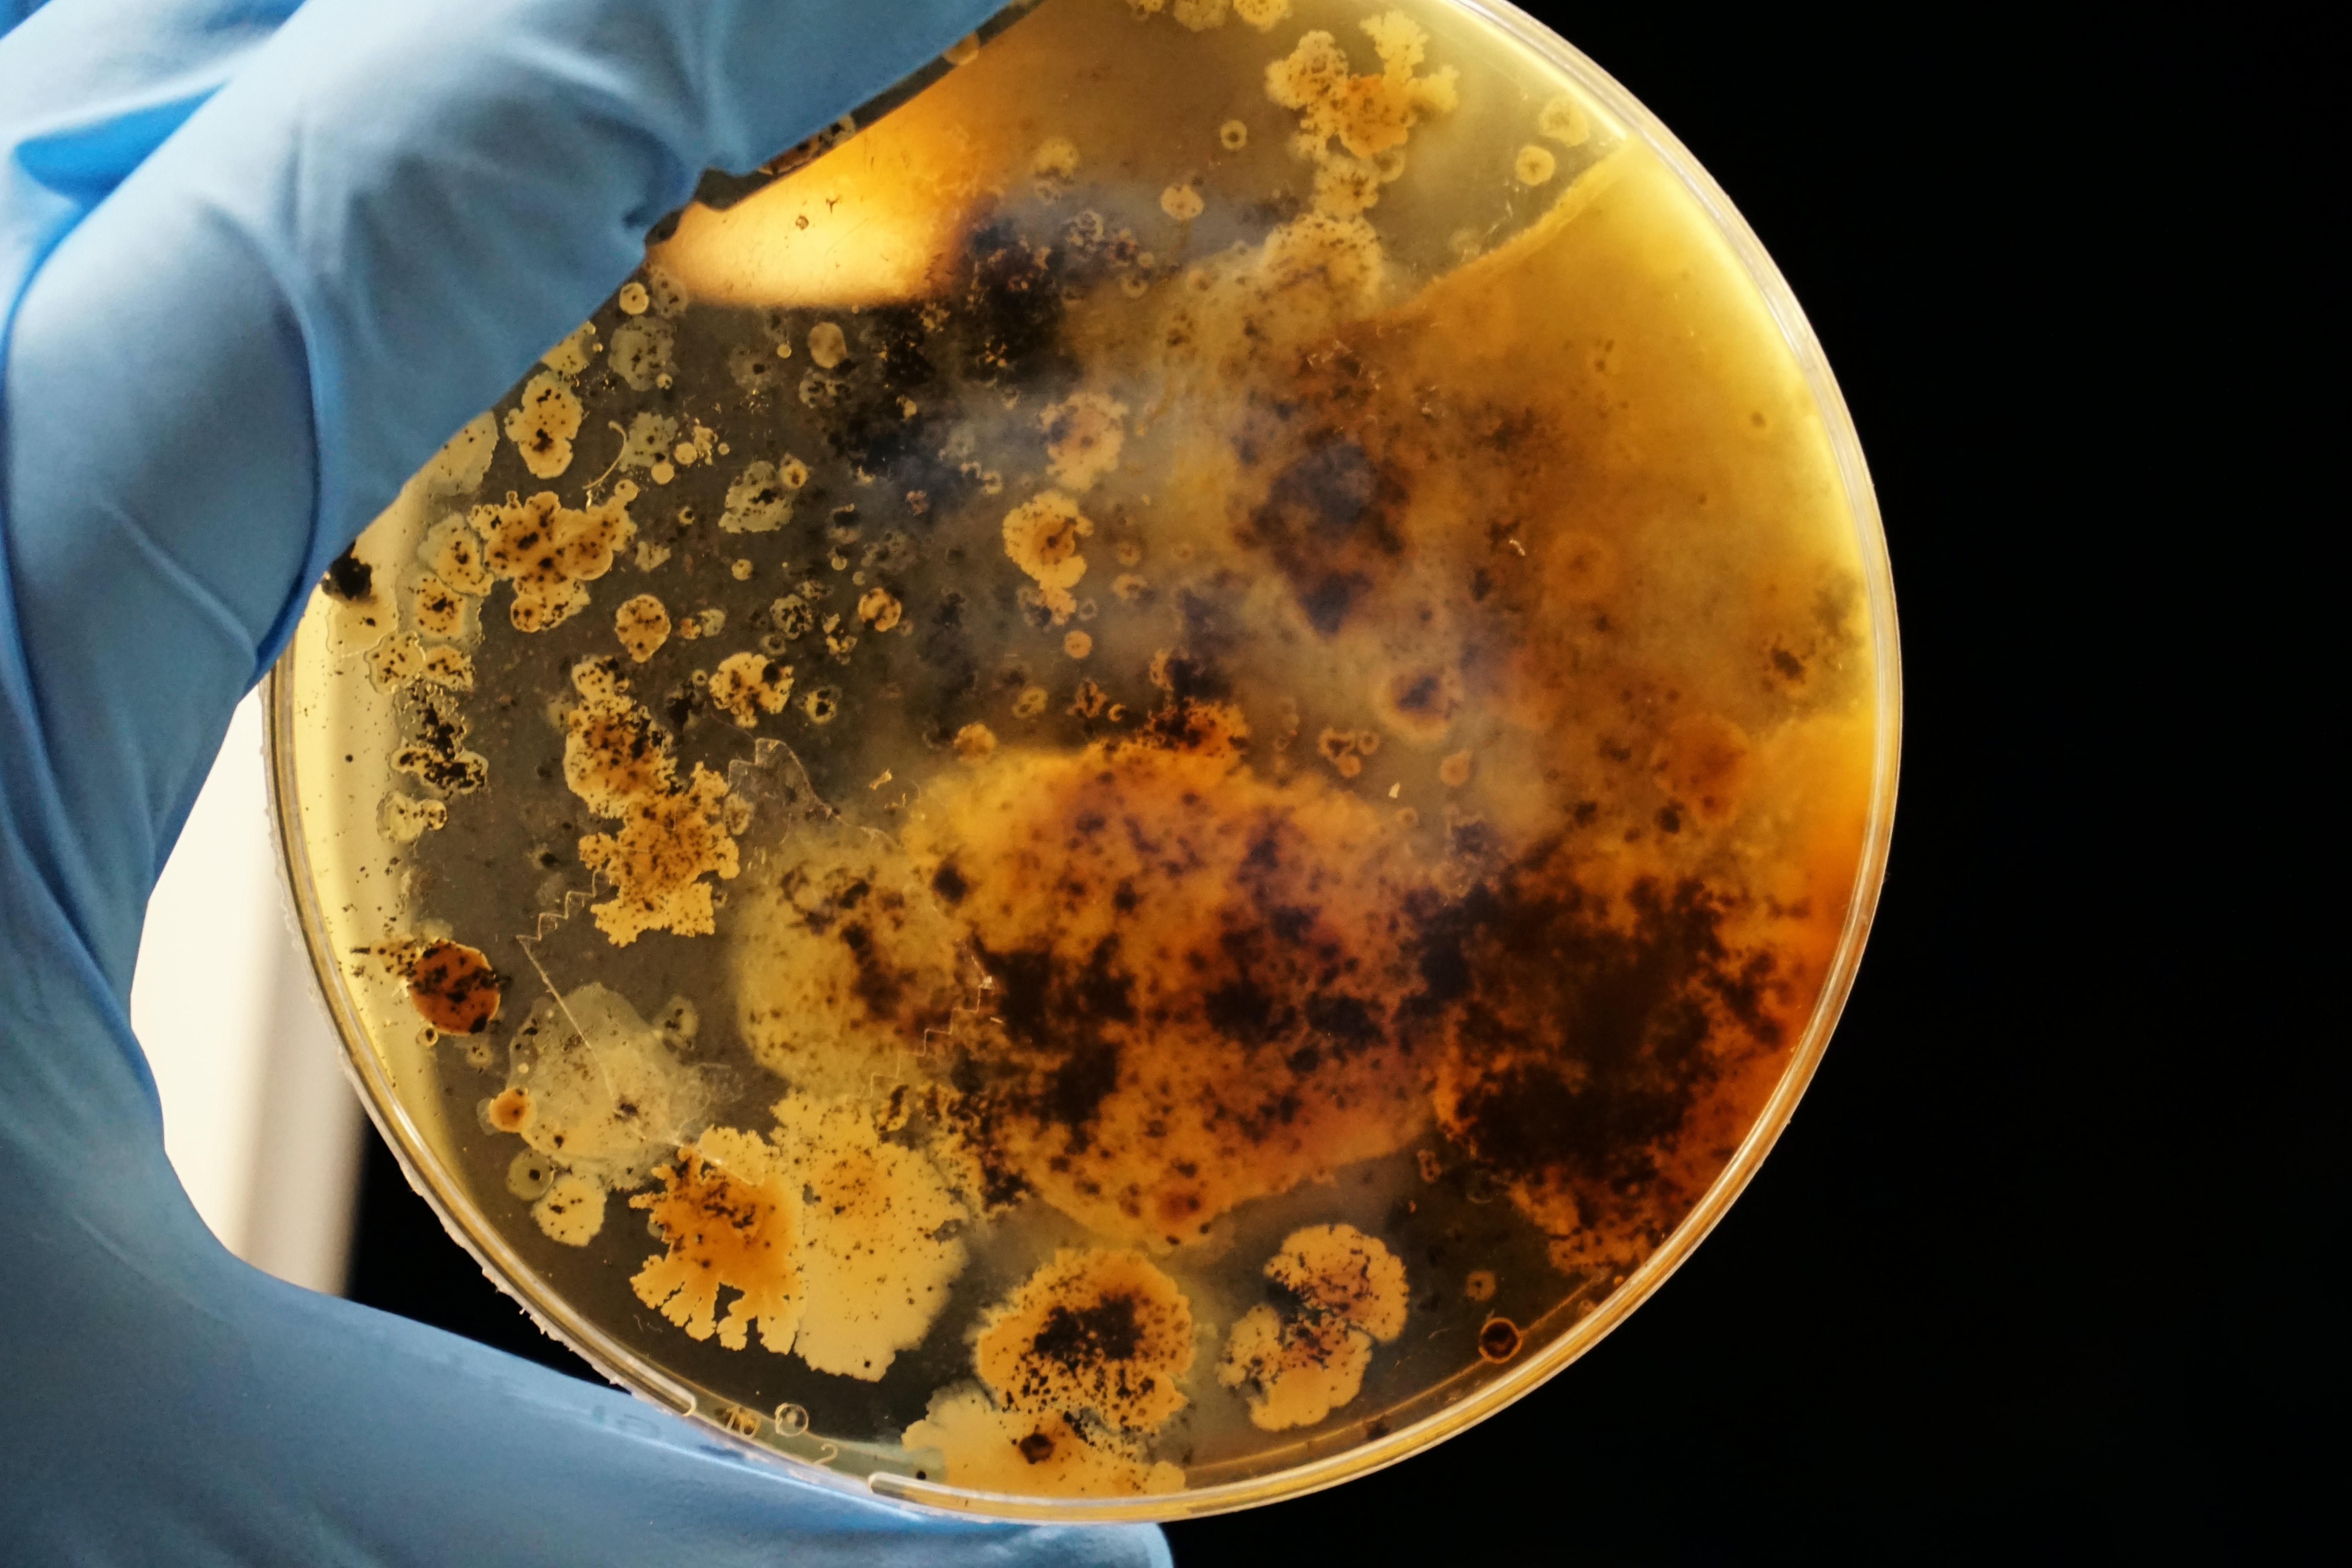 a blue-gloved hand holds up a petri dish mottled with shades of amber, orange, and black